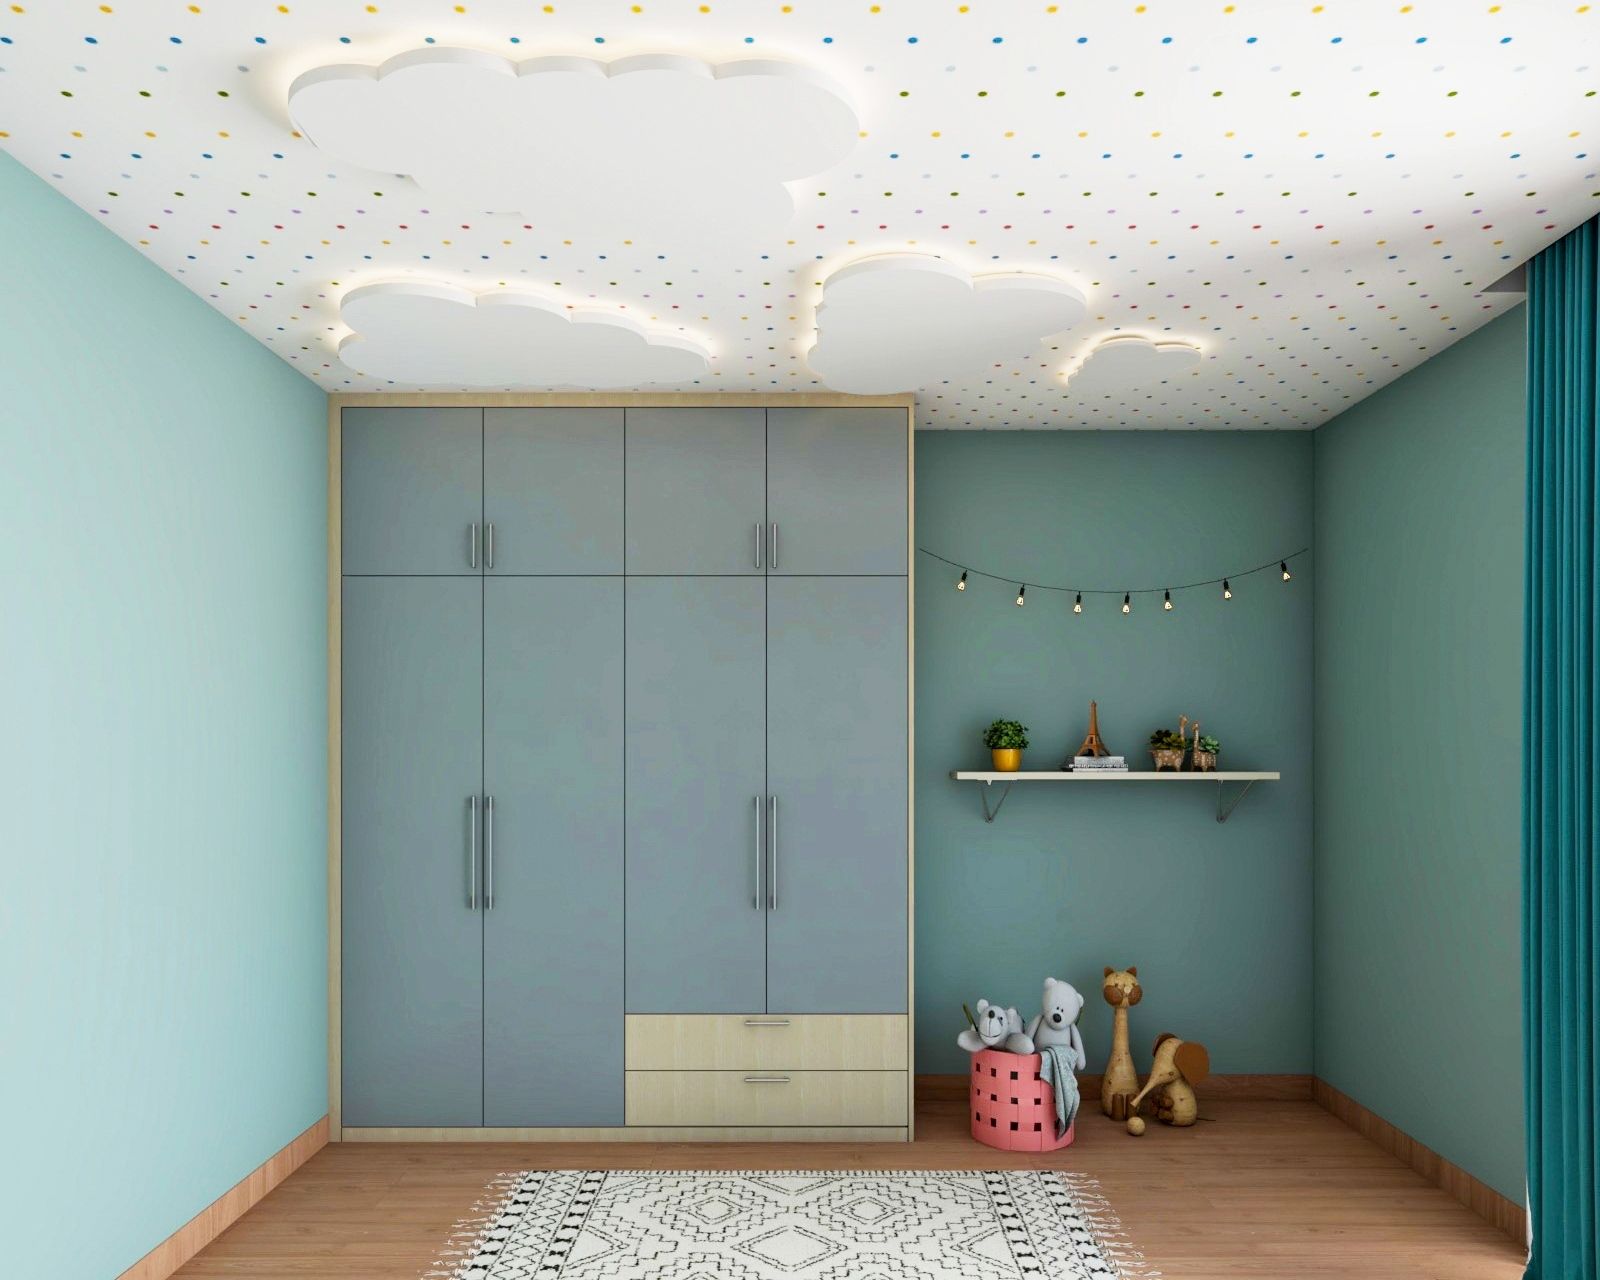 Minimalistic White Cloud Shaped POP Bedroom Ceiling Design With Polka Dots